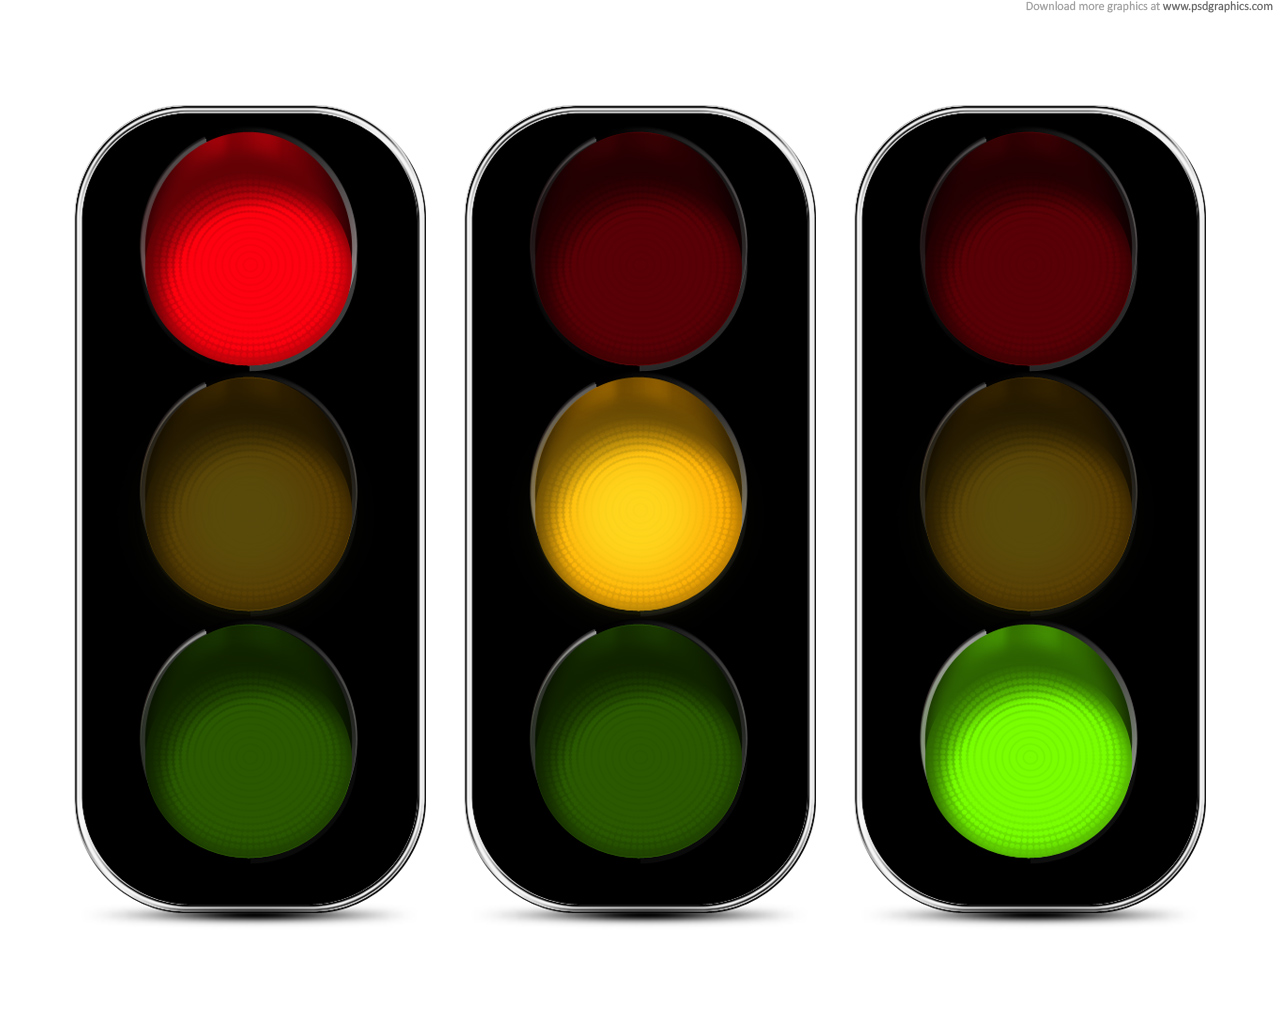 Red stoplight clipart